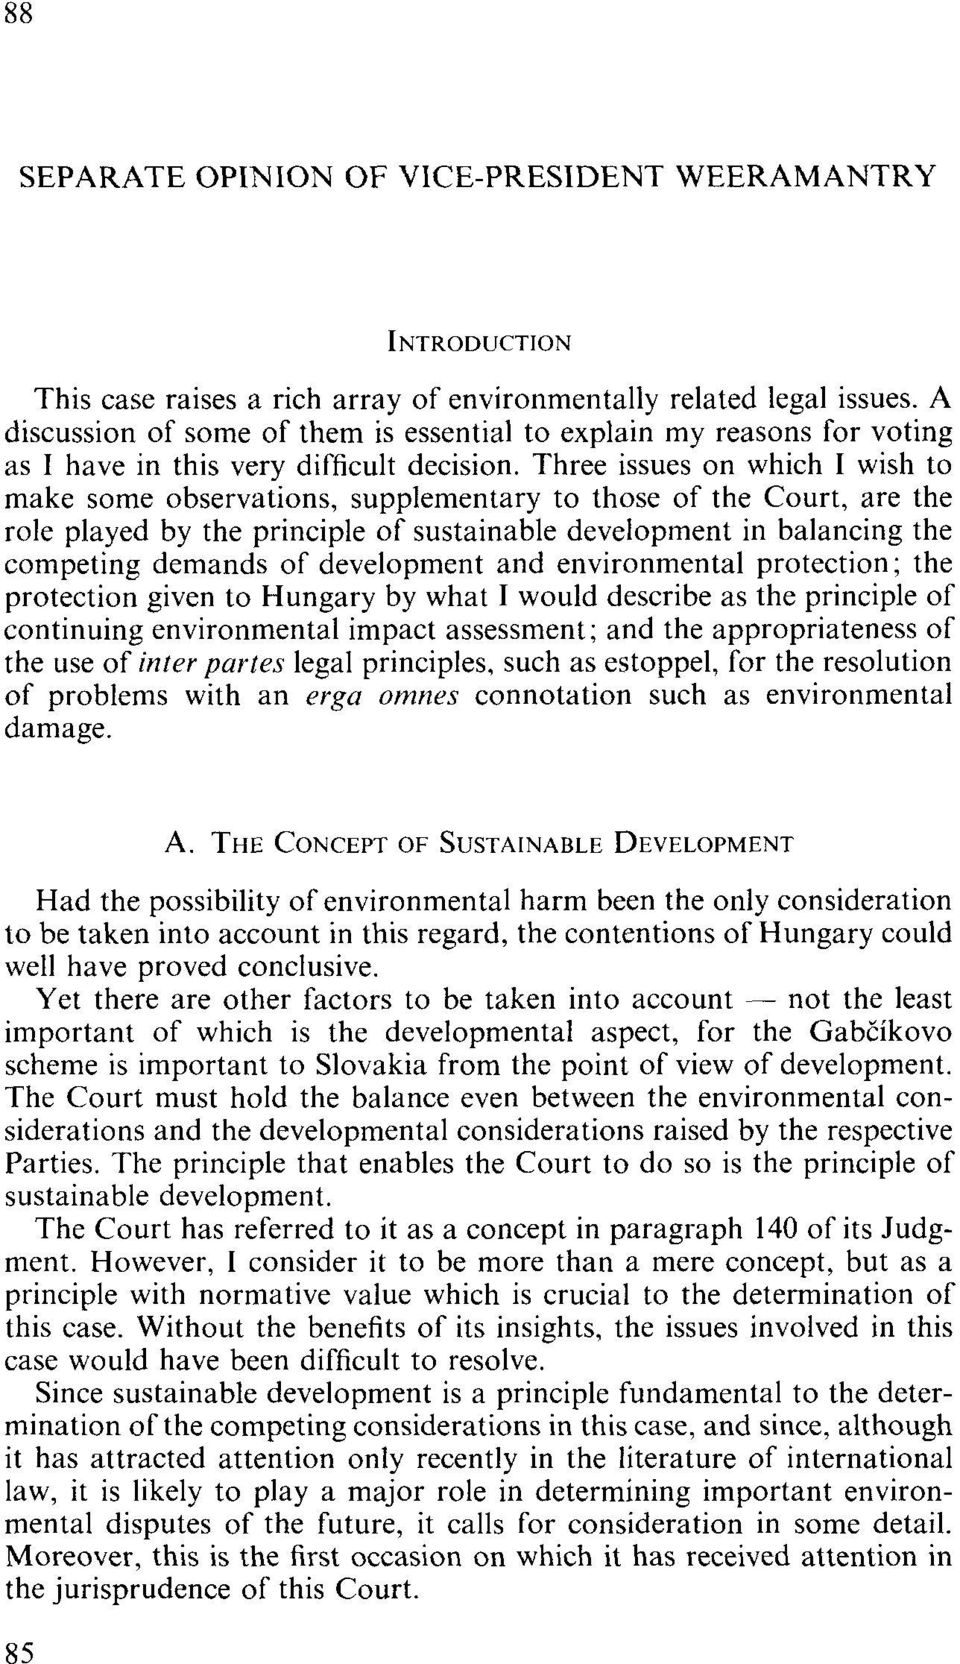 Three issues on which 1 wish to make some observations, supplementary to those of the Court, are the role played by the principle of sustainable development in balancing the competing demands of